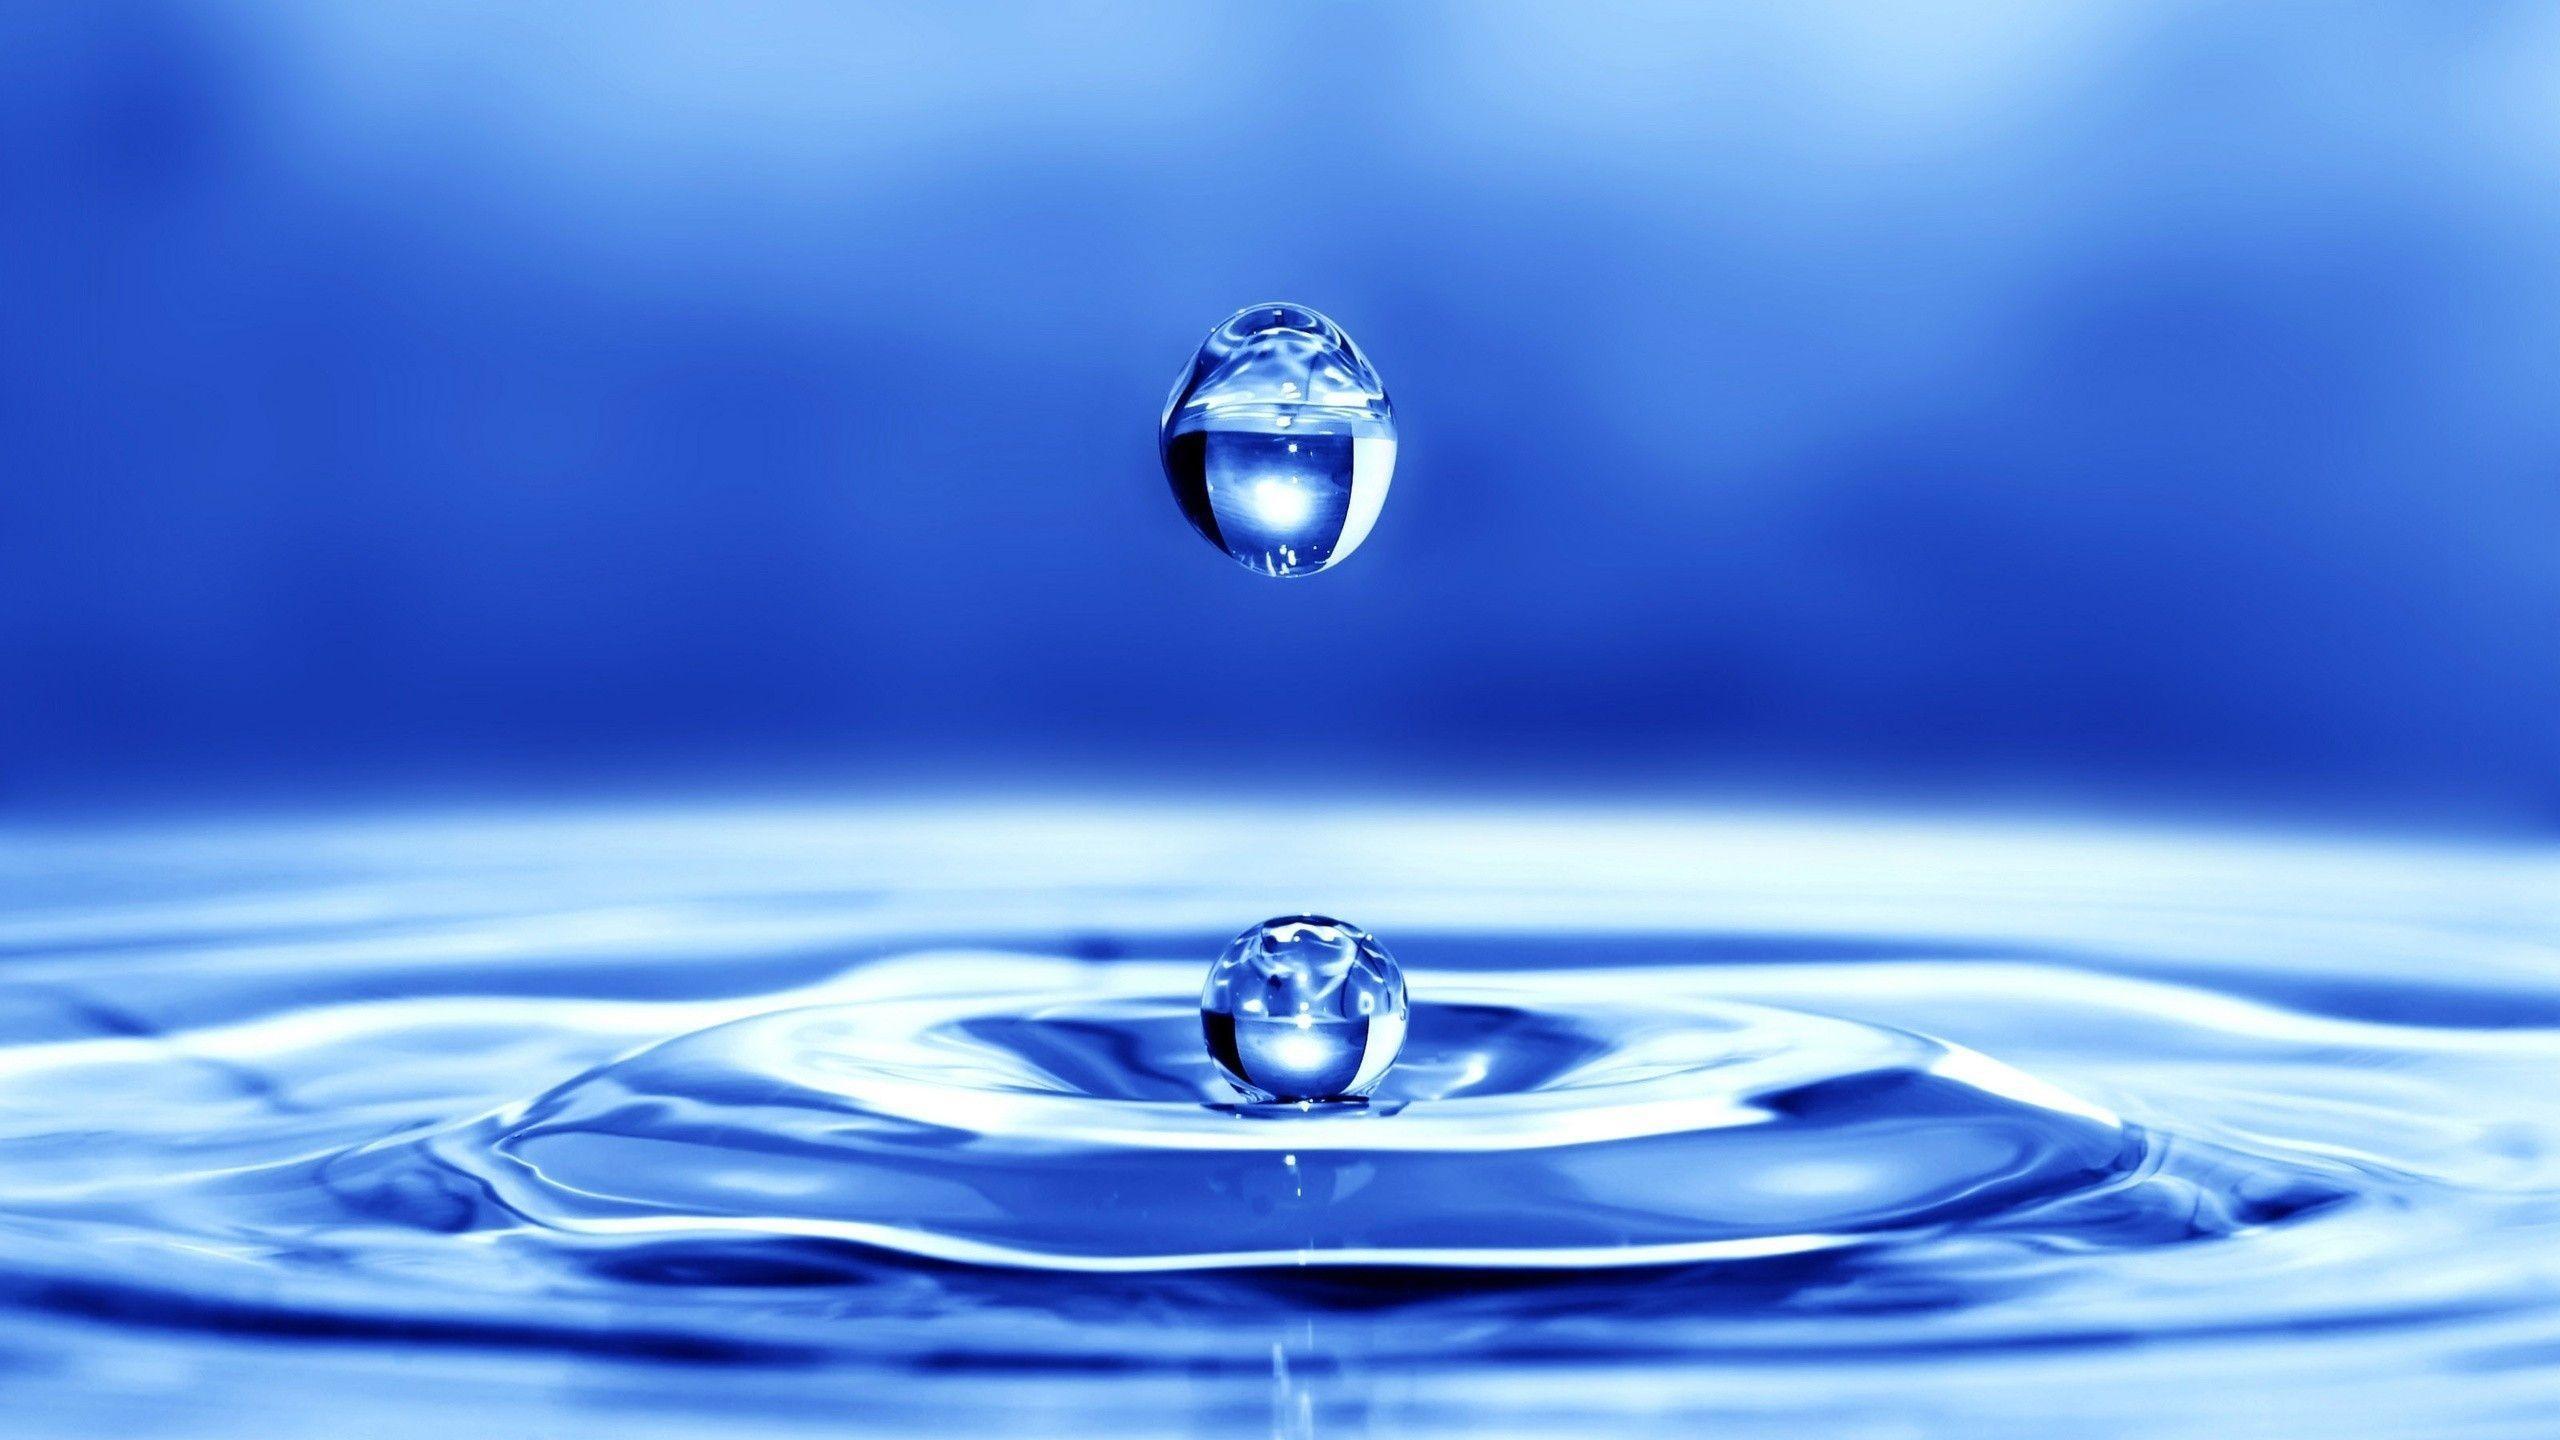 Water Drops Background Images  Free Download on Freepik